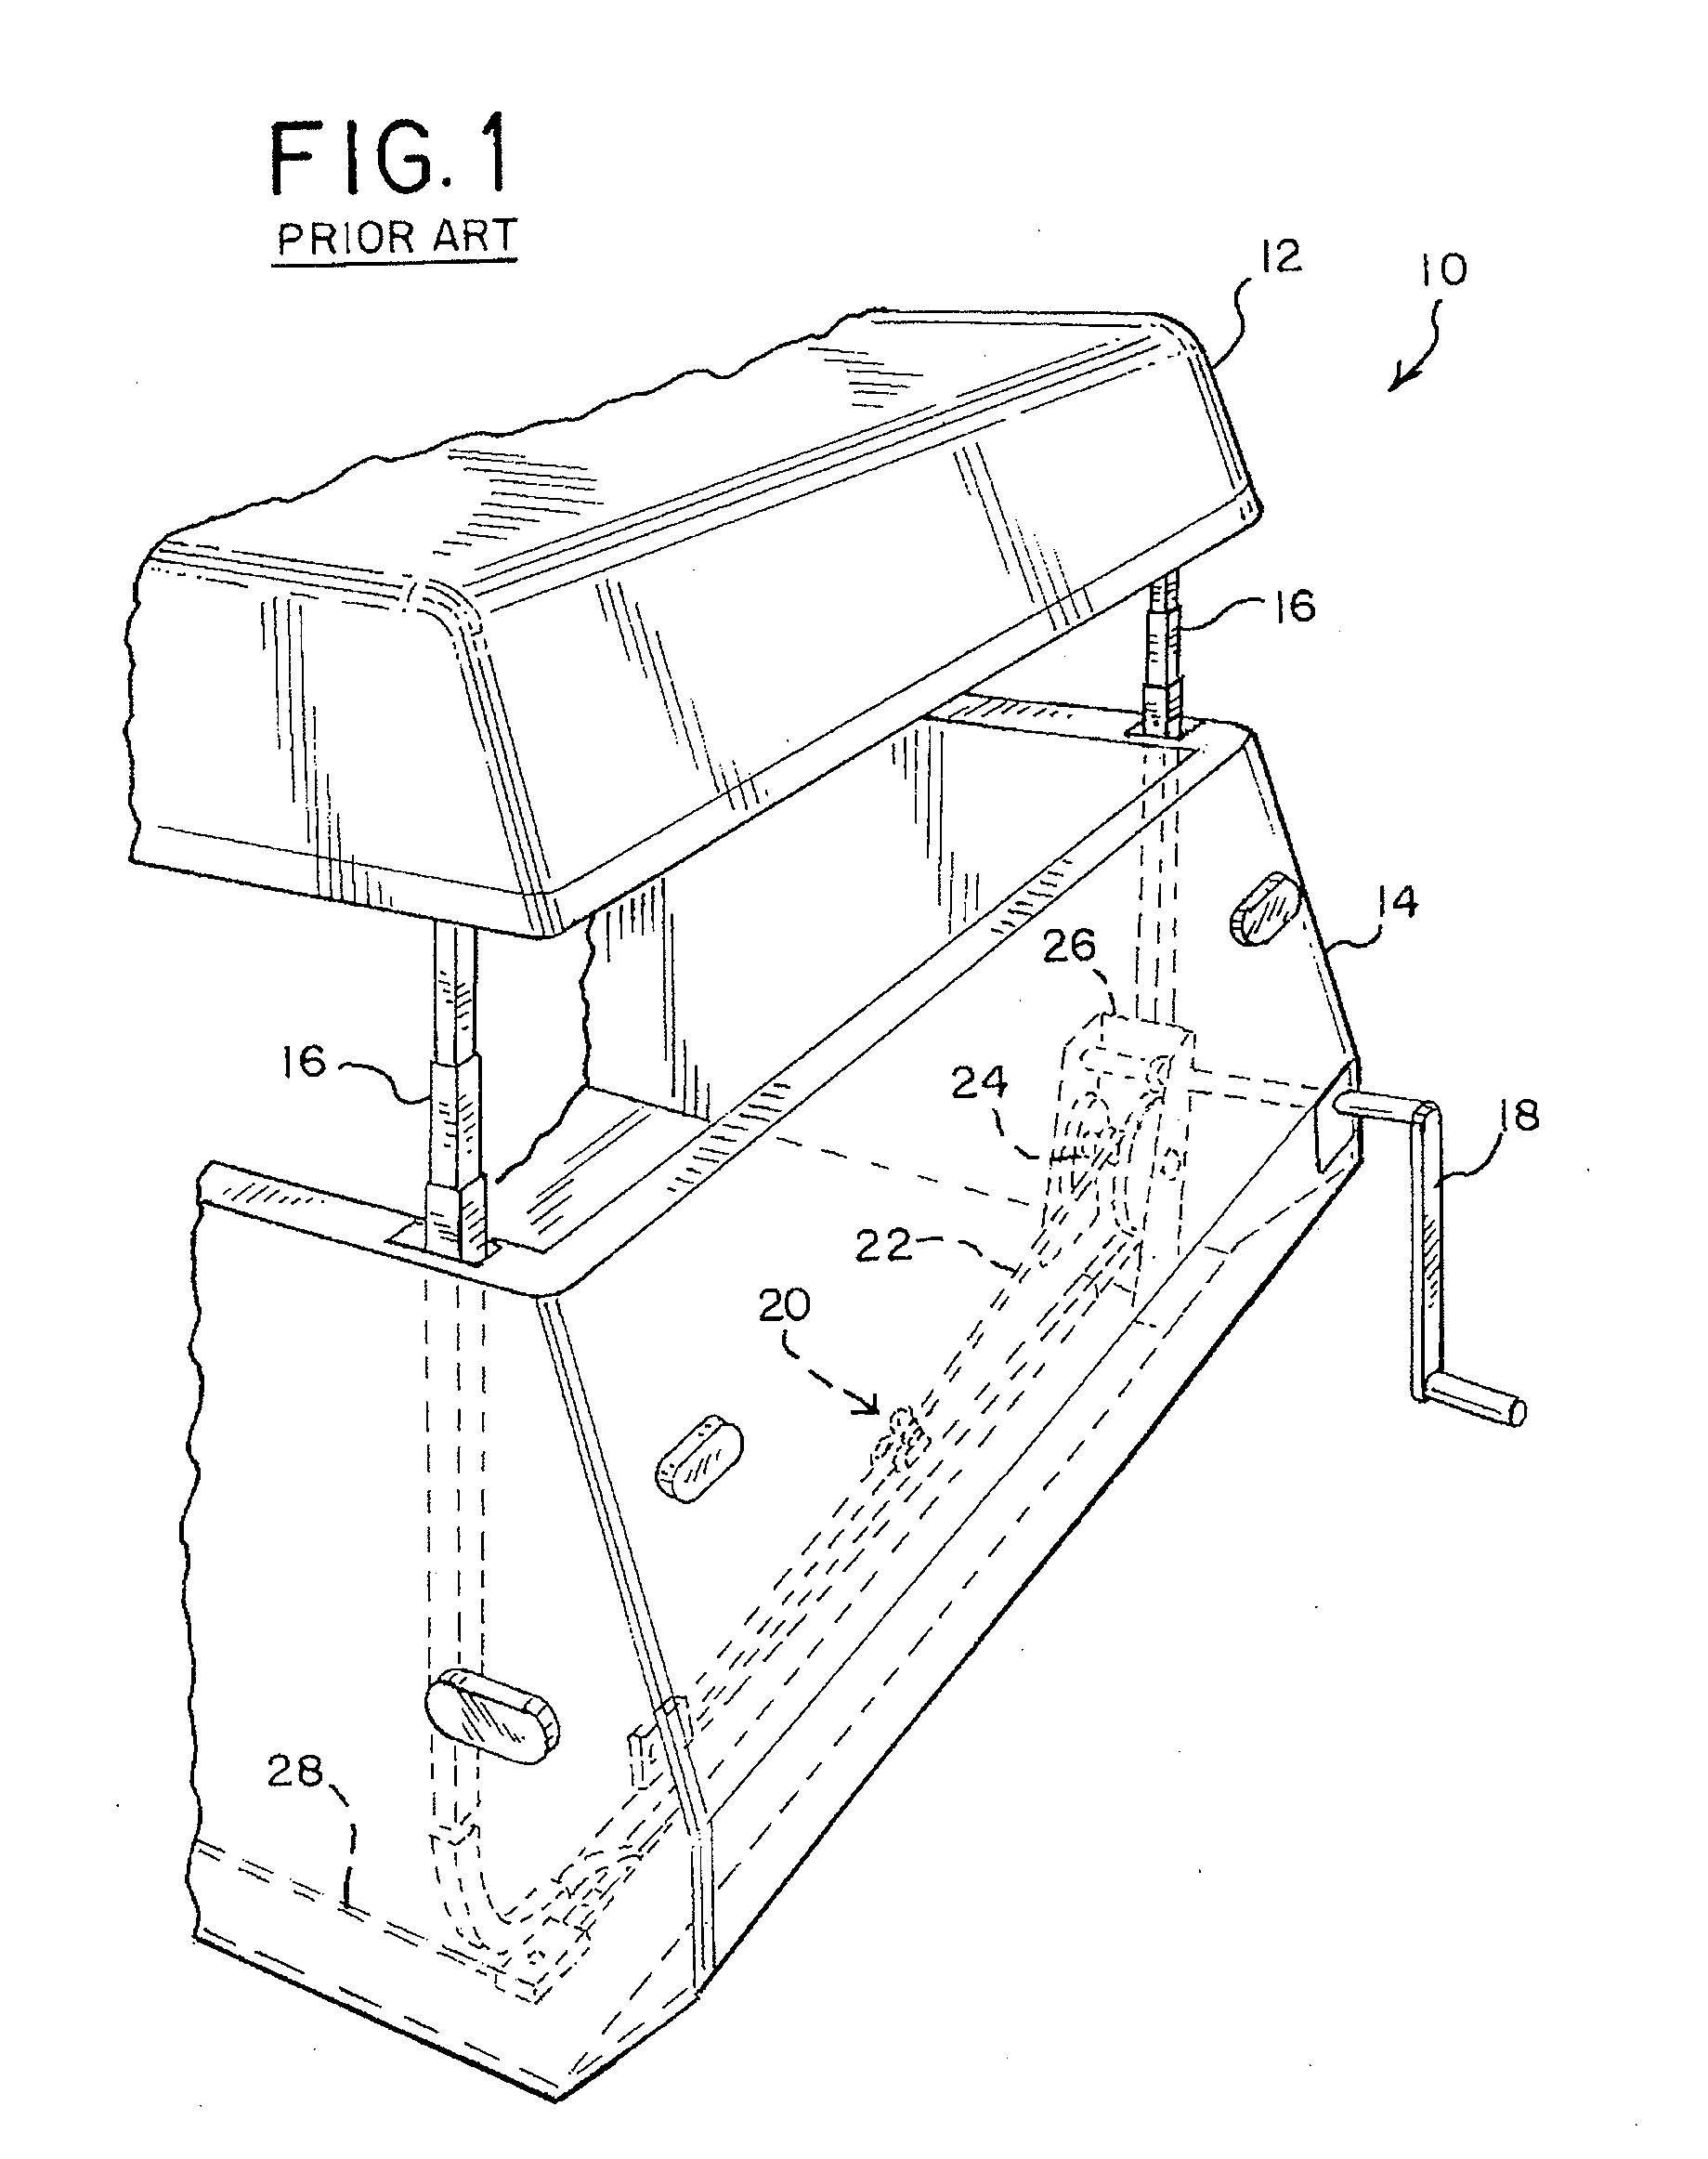 Operating System for a Folding Trailer